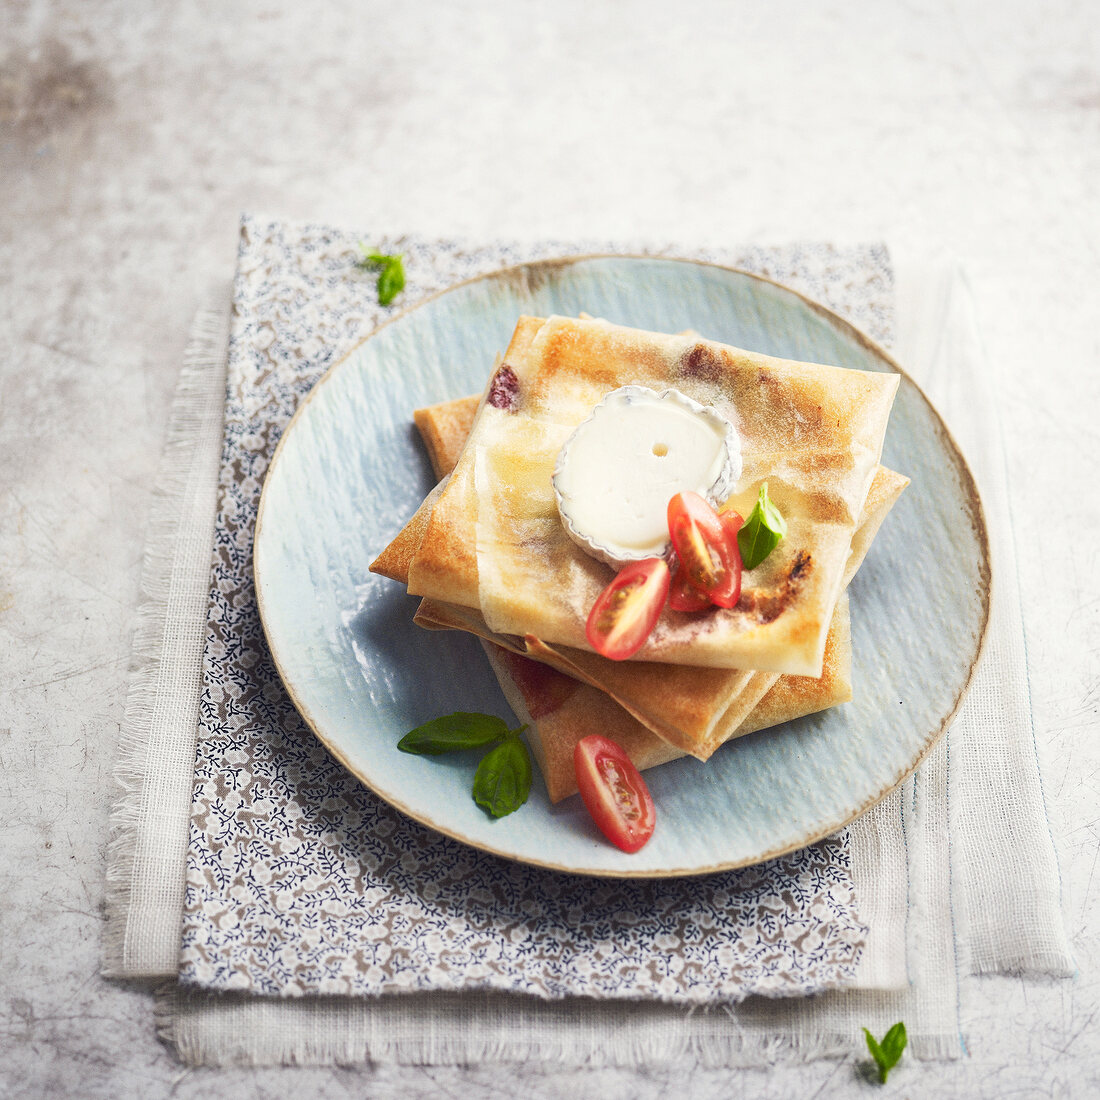 Goat's cheese and tomato filo pastry squares